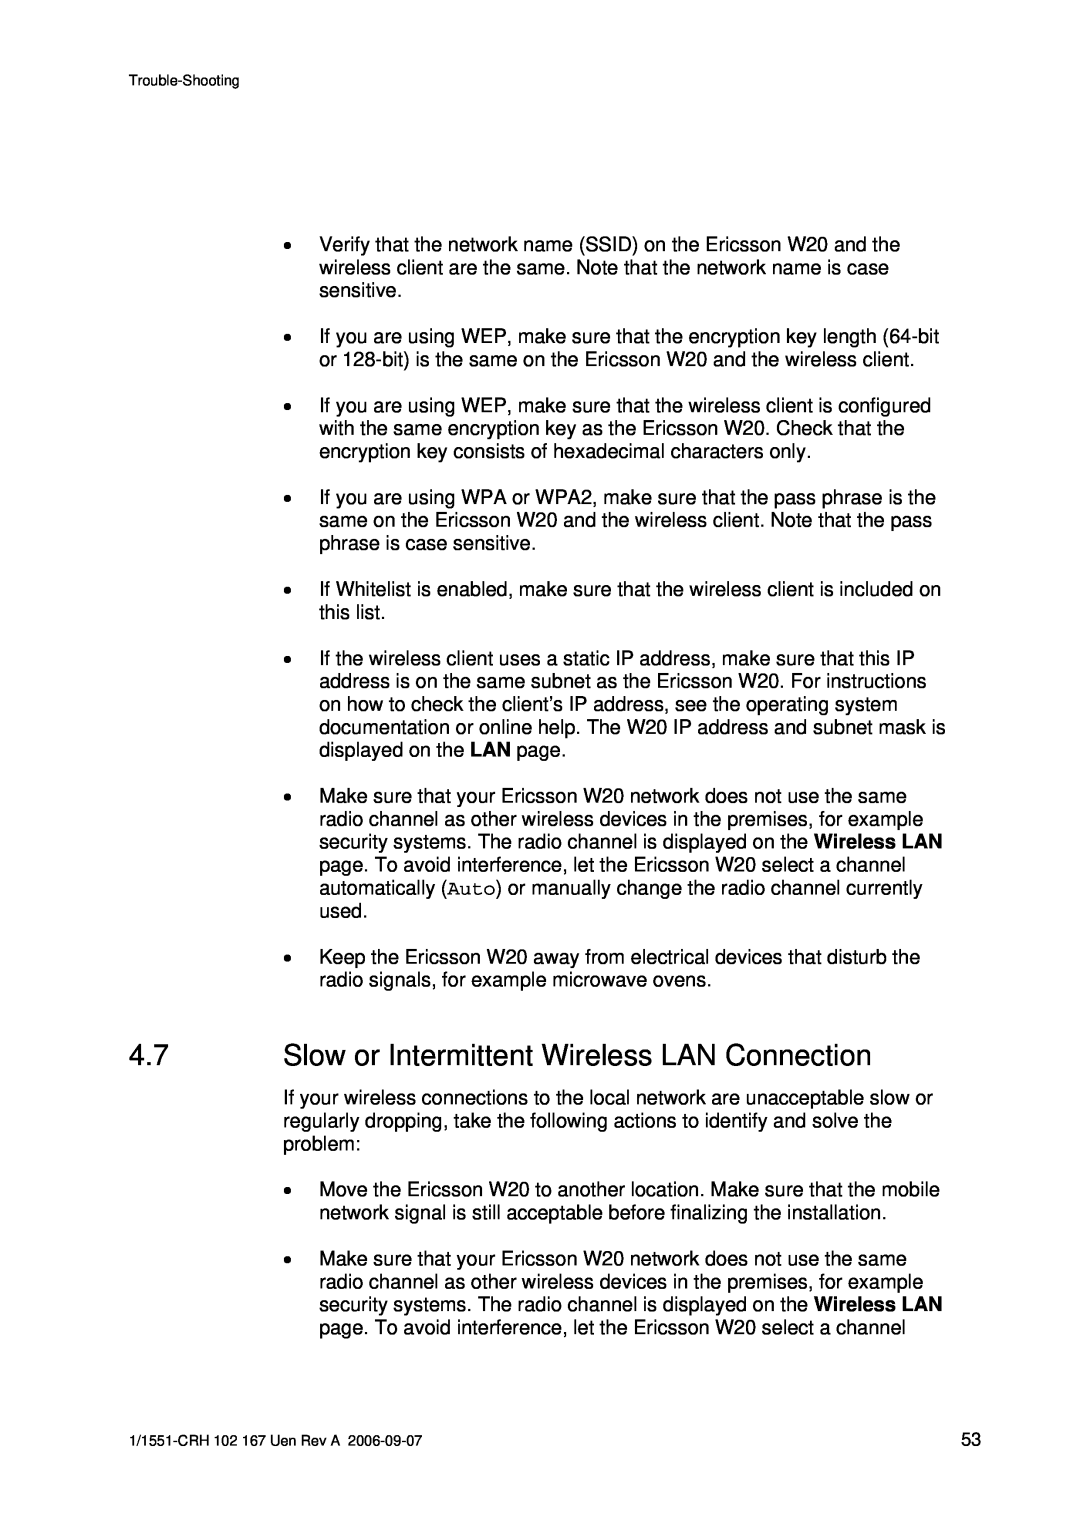 Ericsson W20 manual Slow or Intermittent Wireless LAN Connection, Trouble-Shooting, 1/1551-CRH 102 167 Uen Rev A 